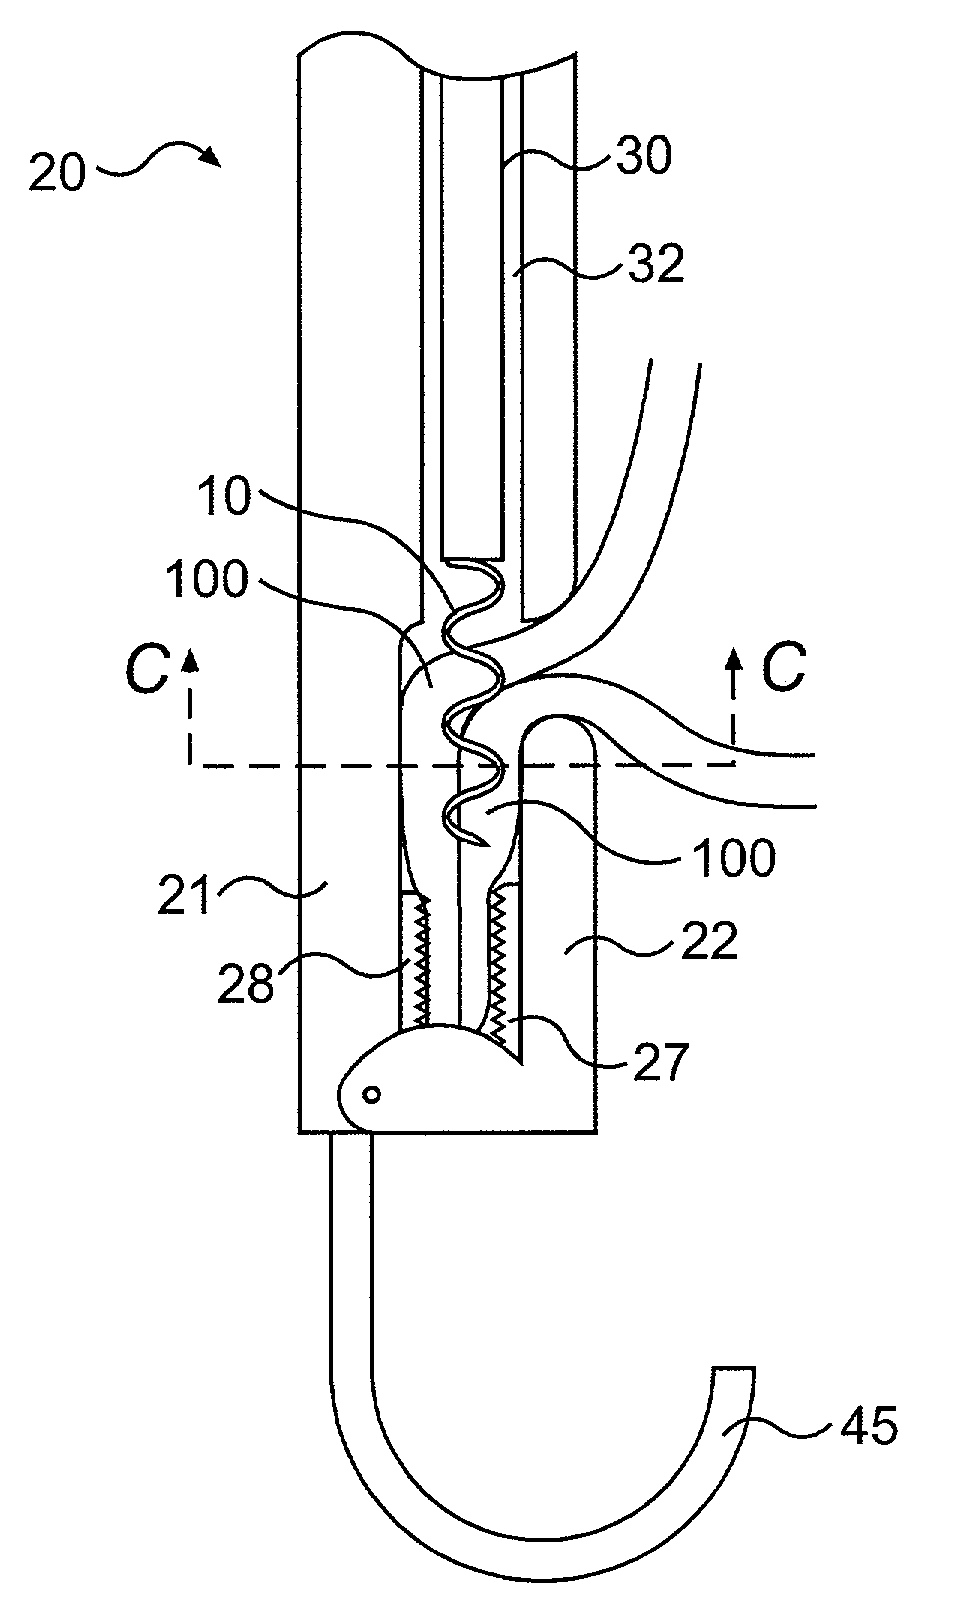 Tissue fastening devices and related insertion tools and methods